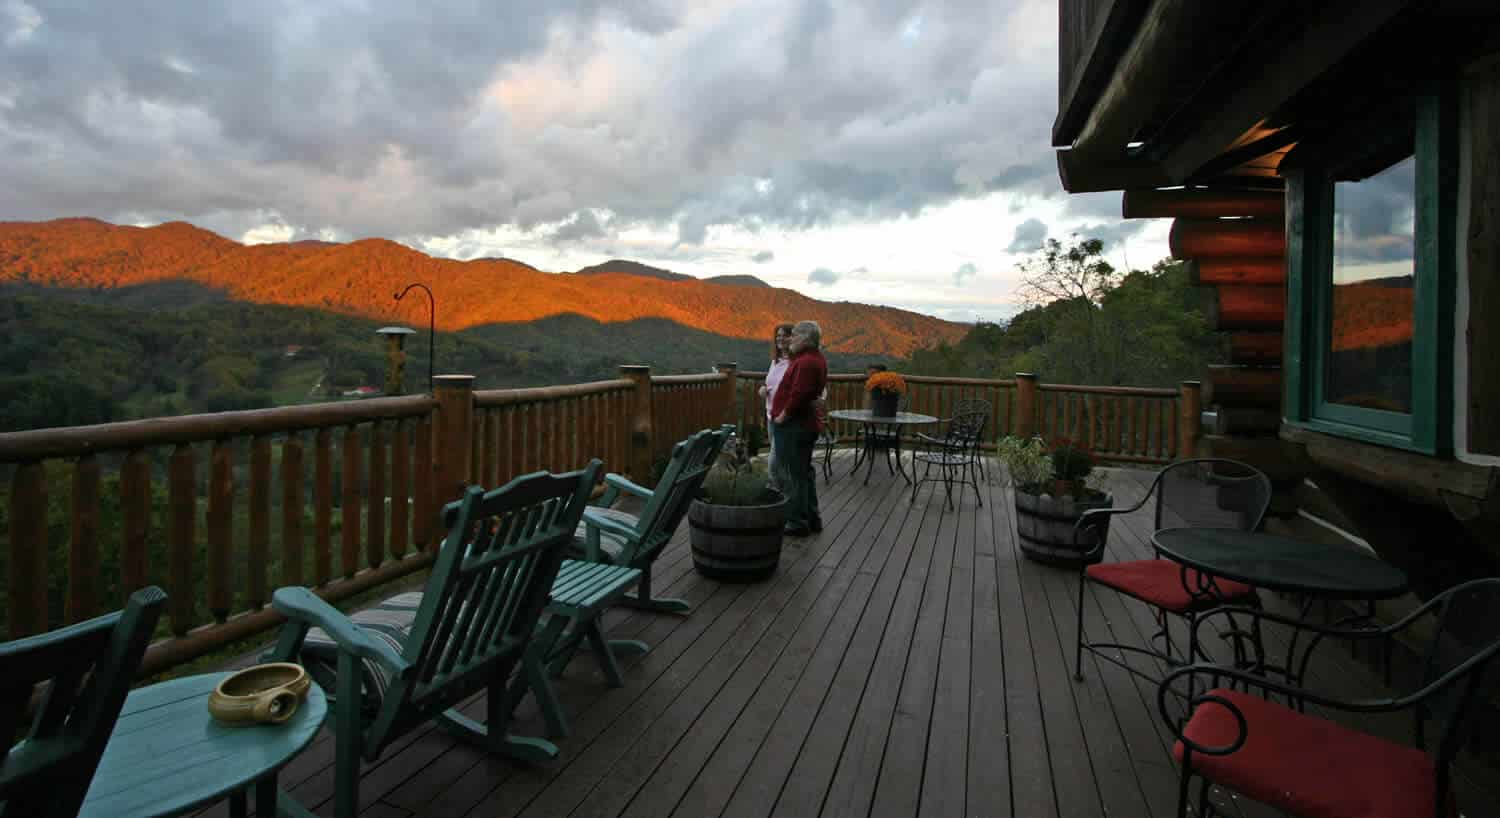 Couple standing together on a wooden deck with green rocking chairs overlooking a mountain valley. 